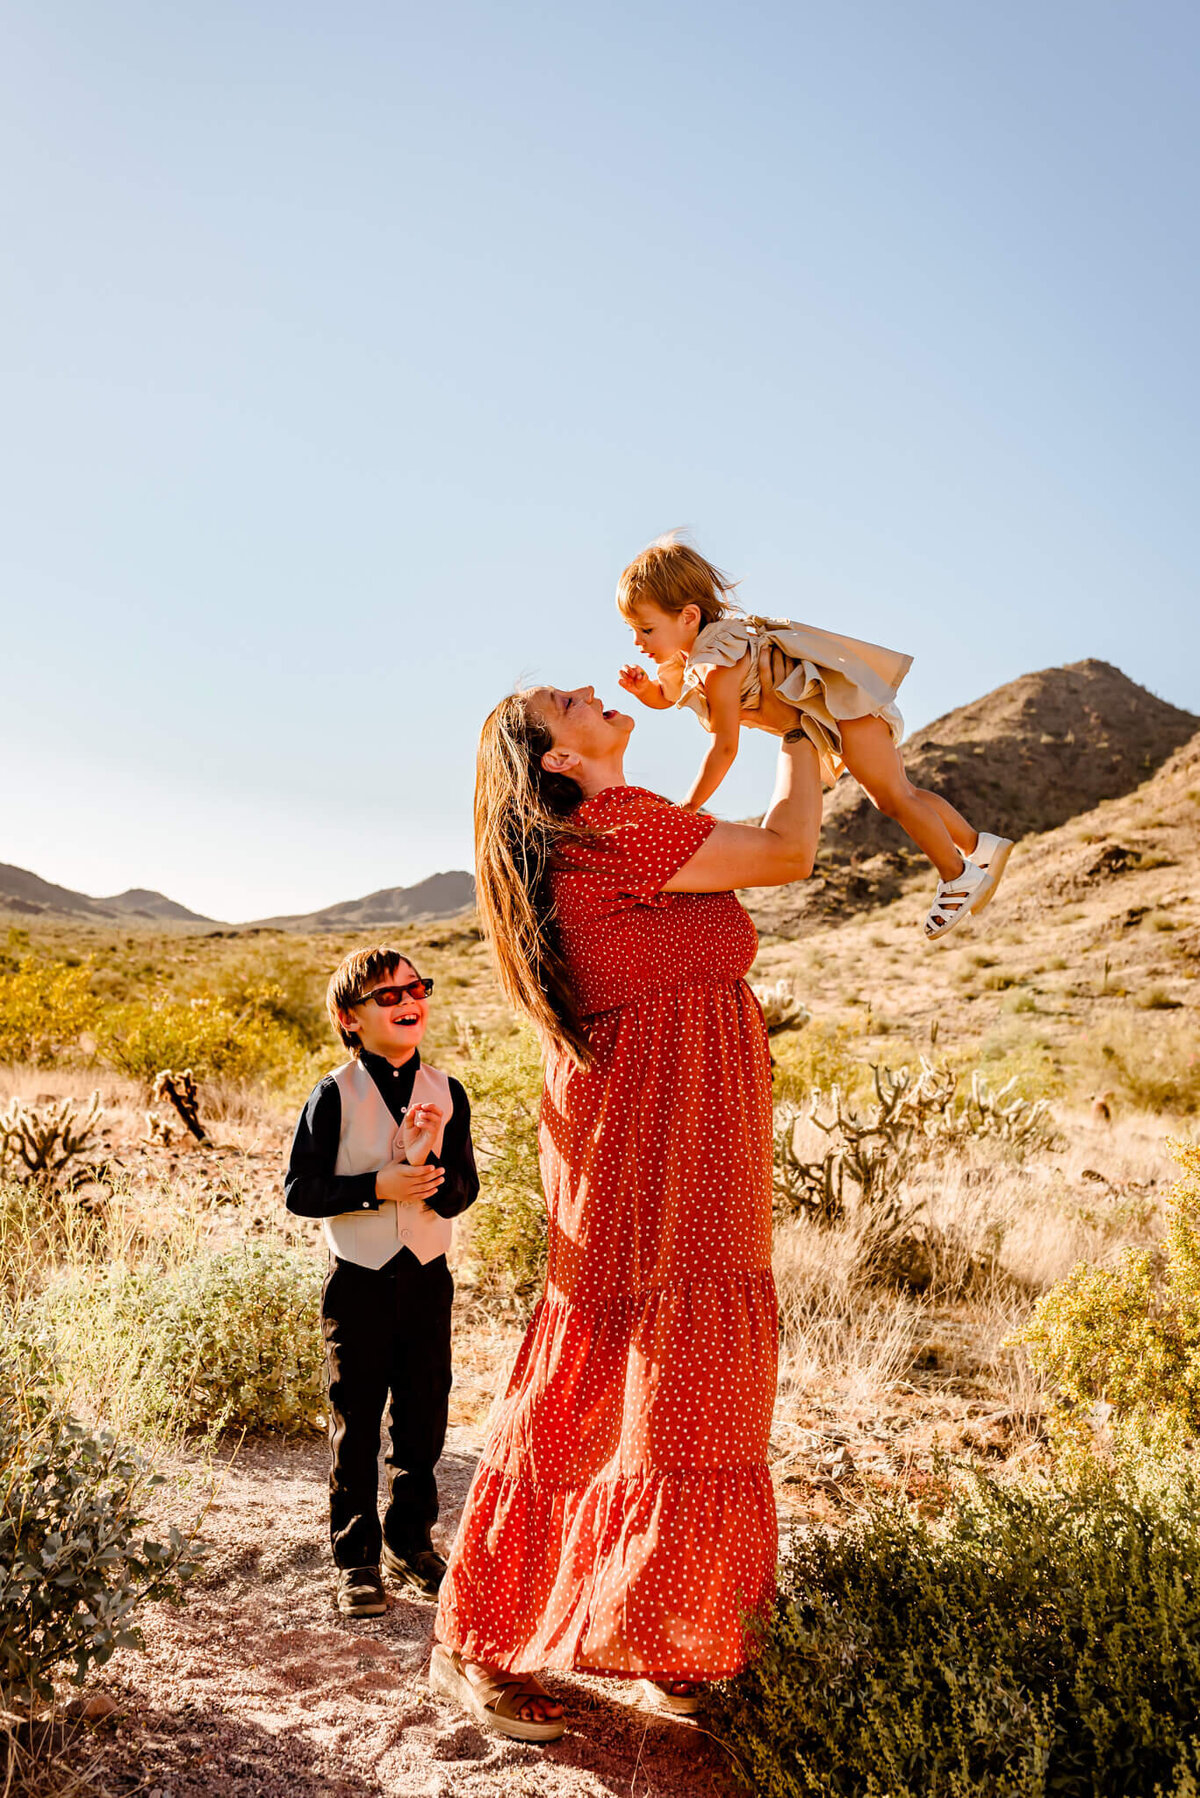 mom playing with daughter and son in Arizona desert for family photographs